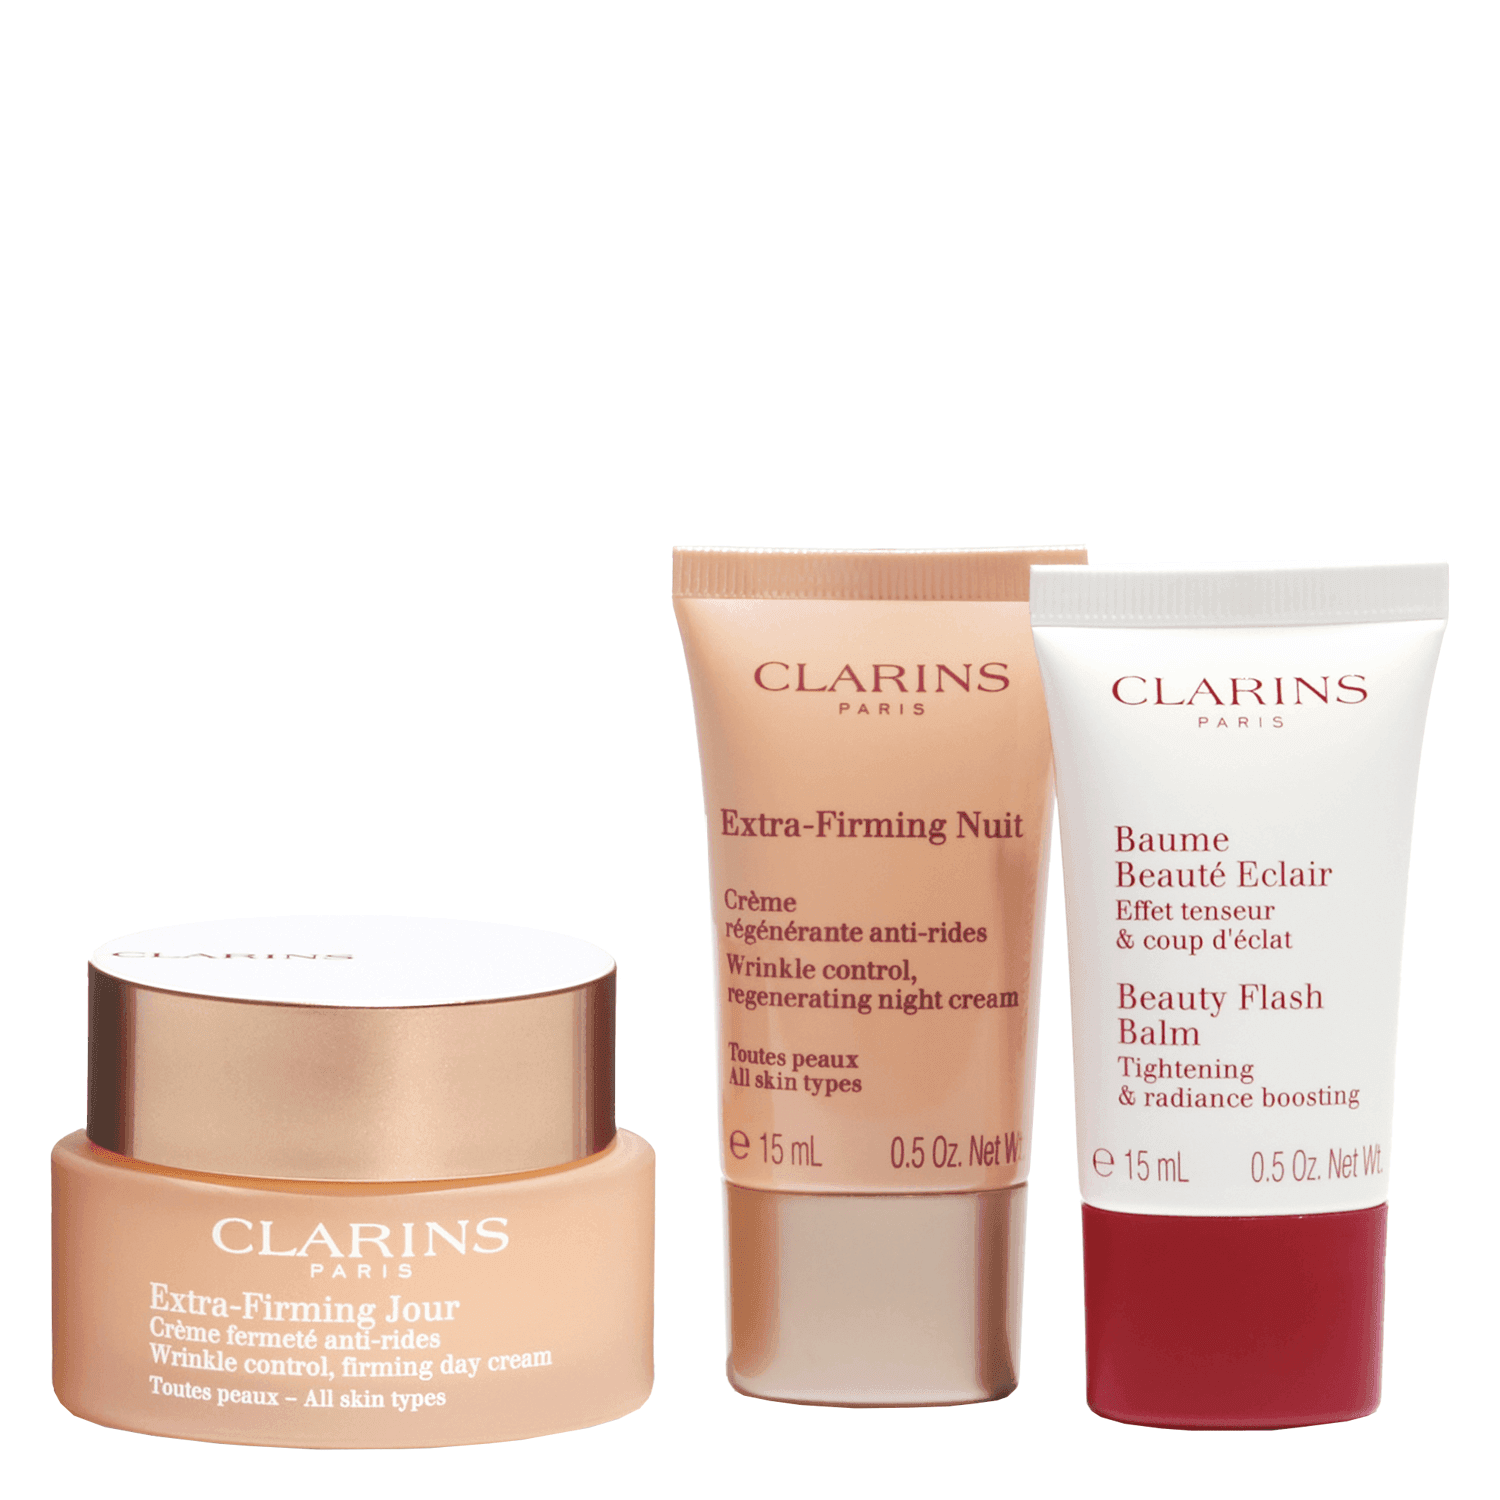 Clarins Specials - Extra-Firming Kit